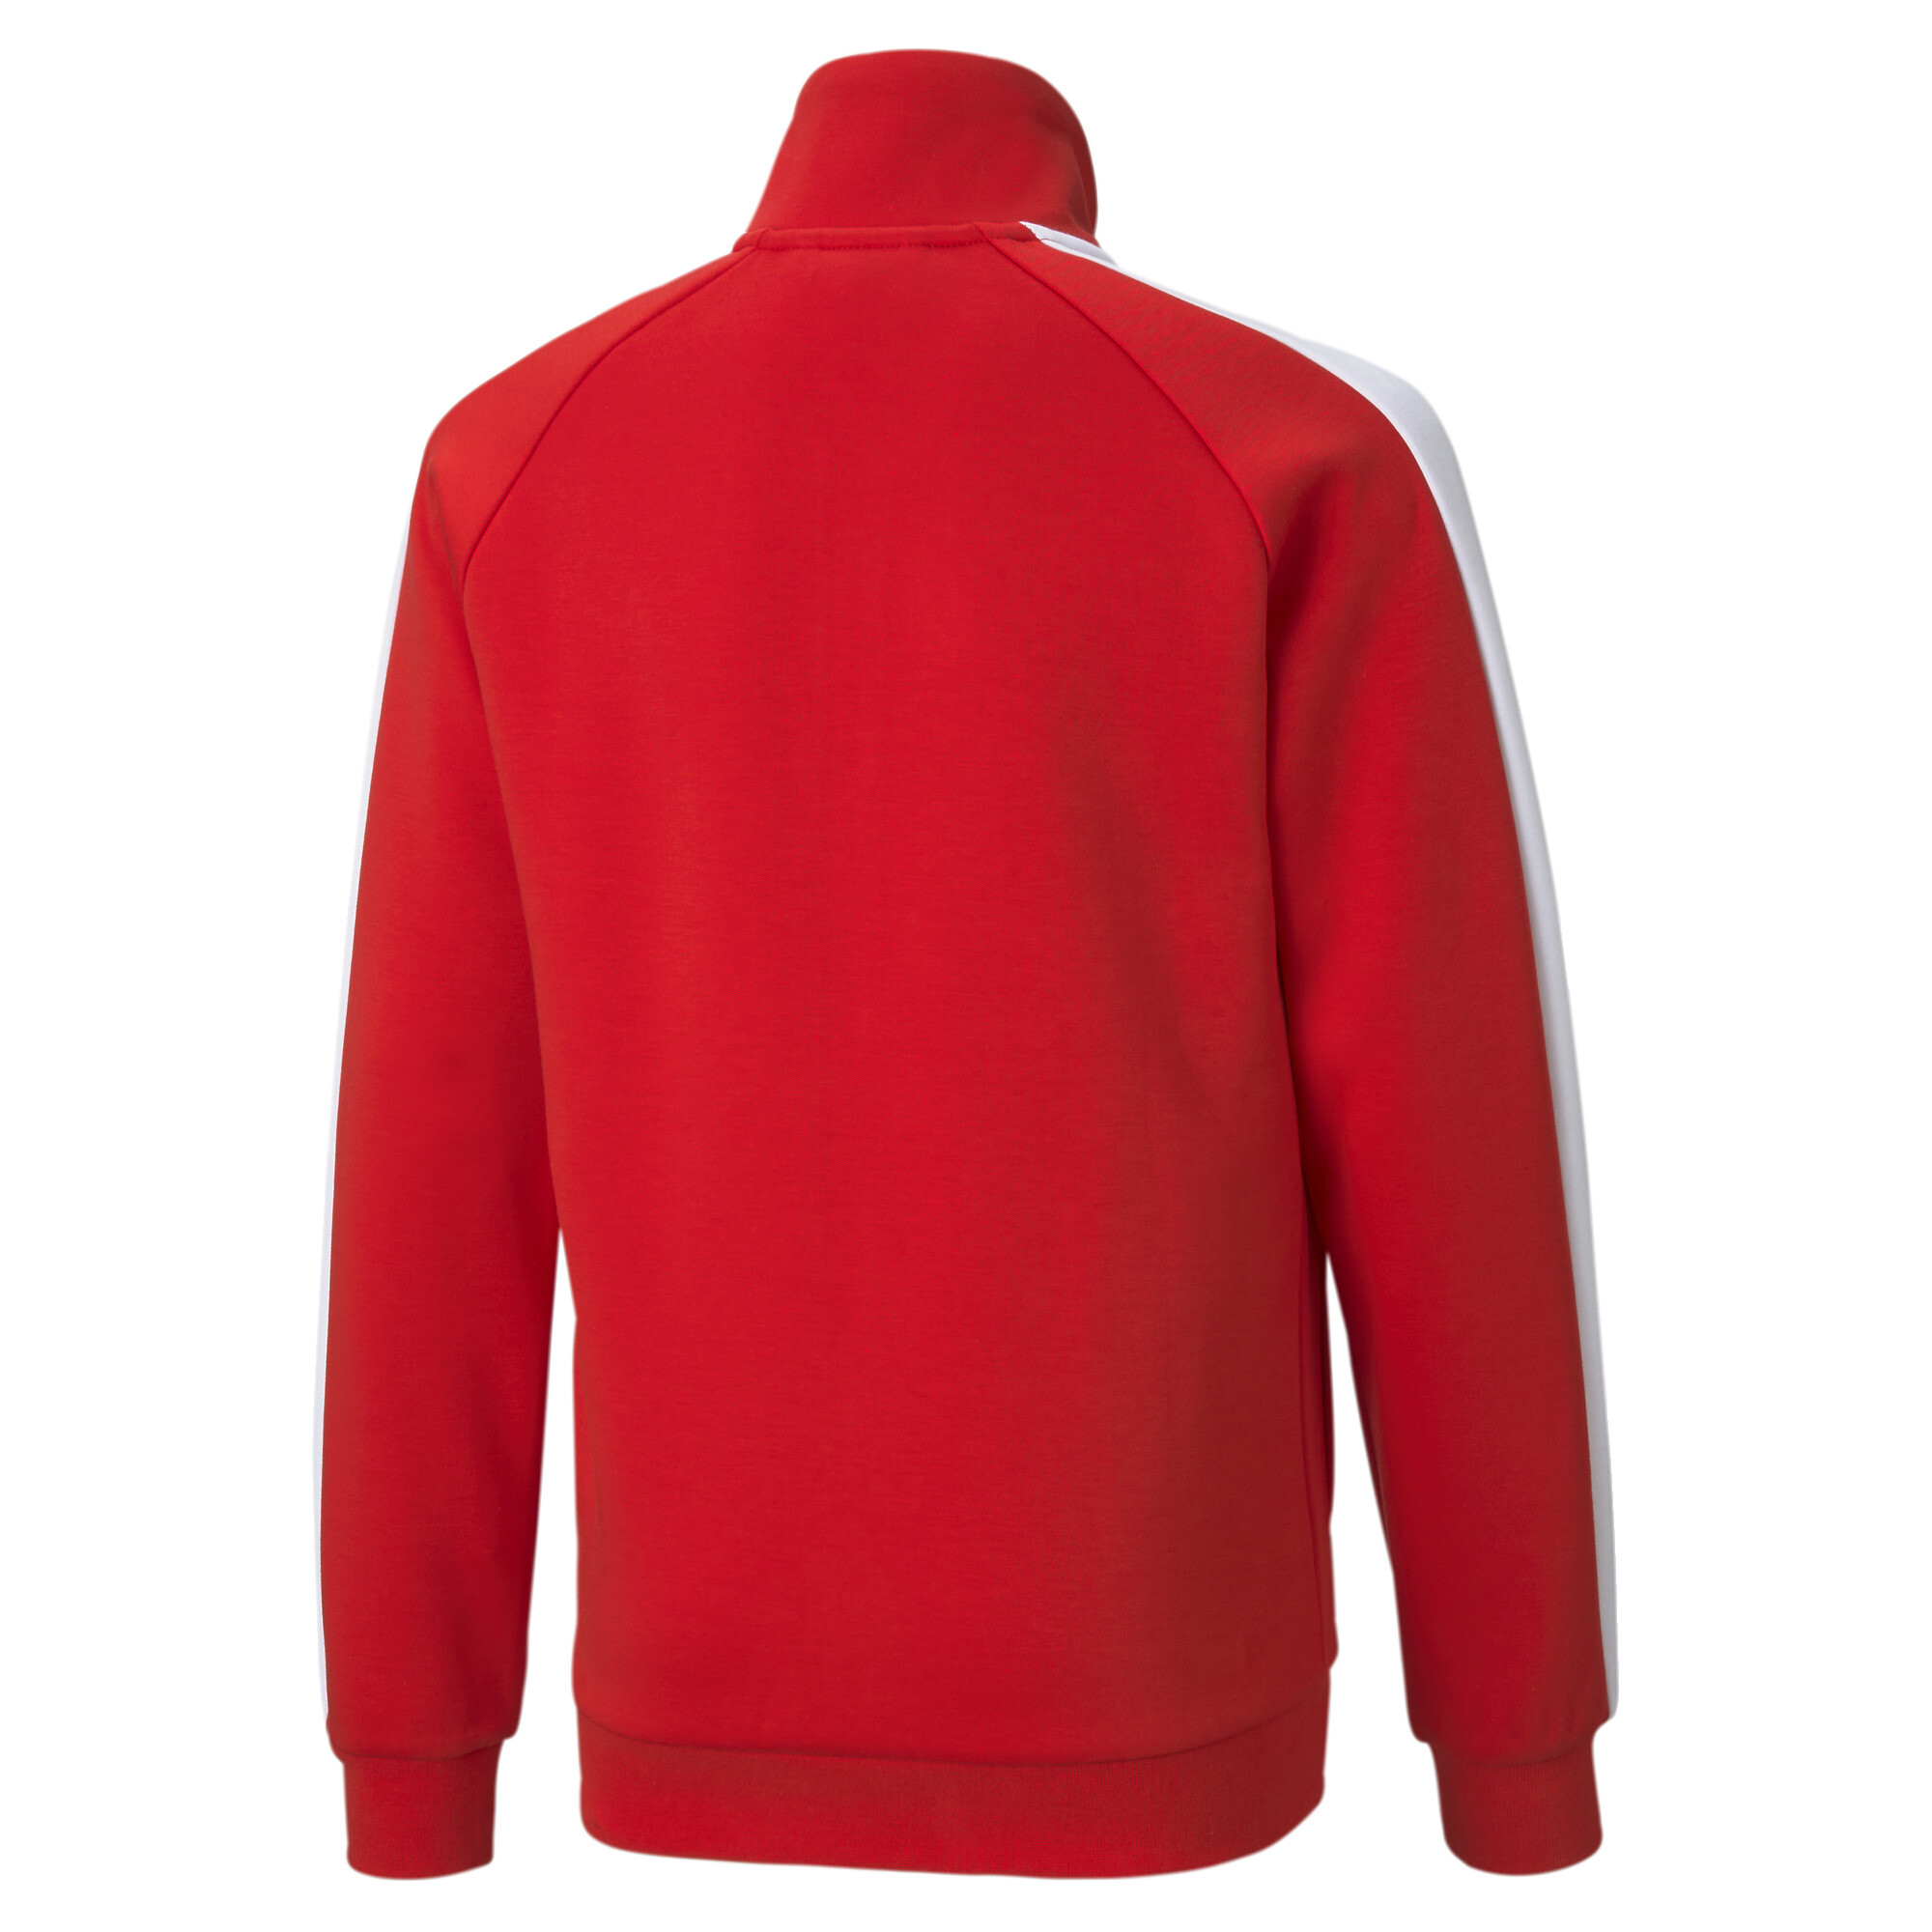 PUMA Iconic T7 Track Jacket In Red, Size 5-6 Youth